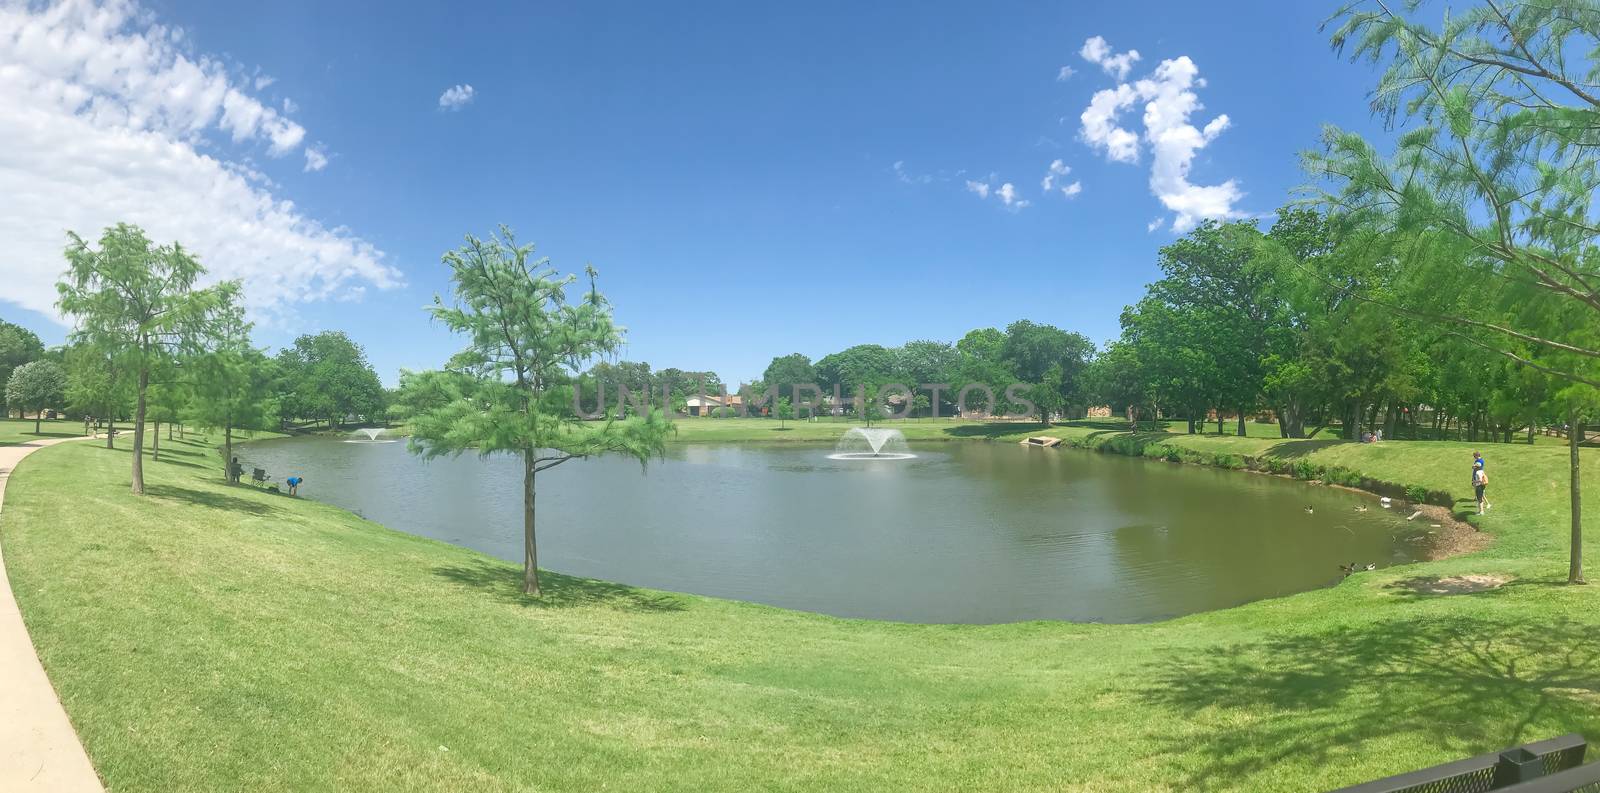 Panoramic view residential park with double floating fountains pathway and picnic bench in Coppell, Texas, USA by trongnguyen